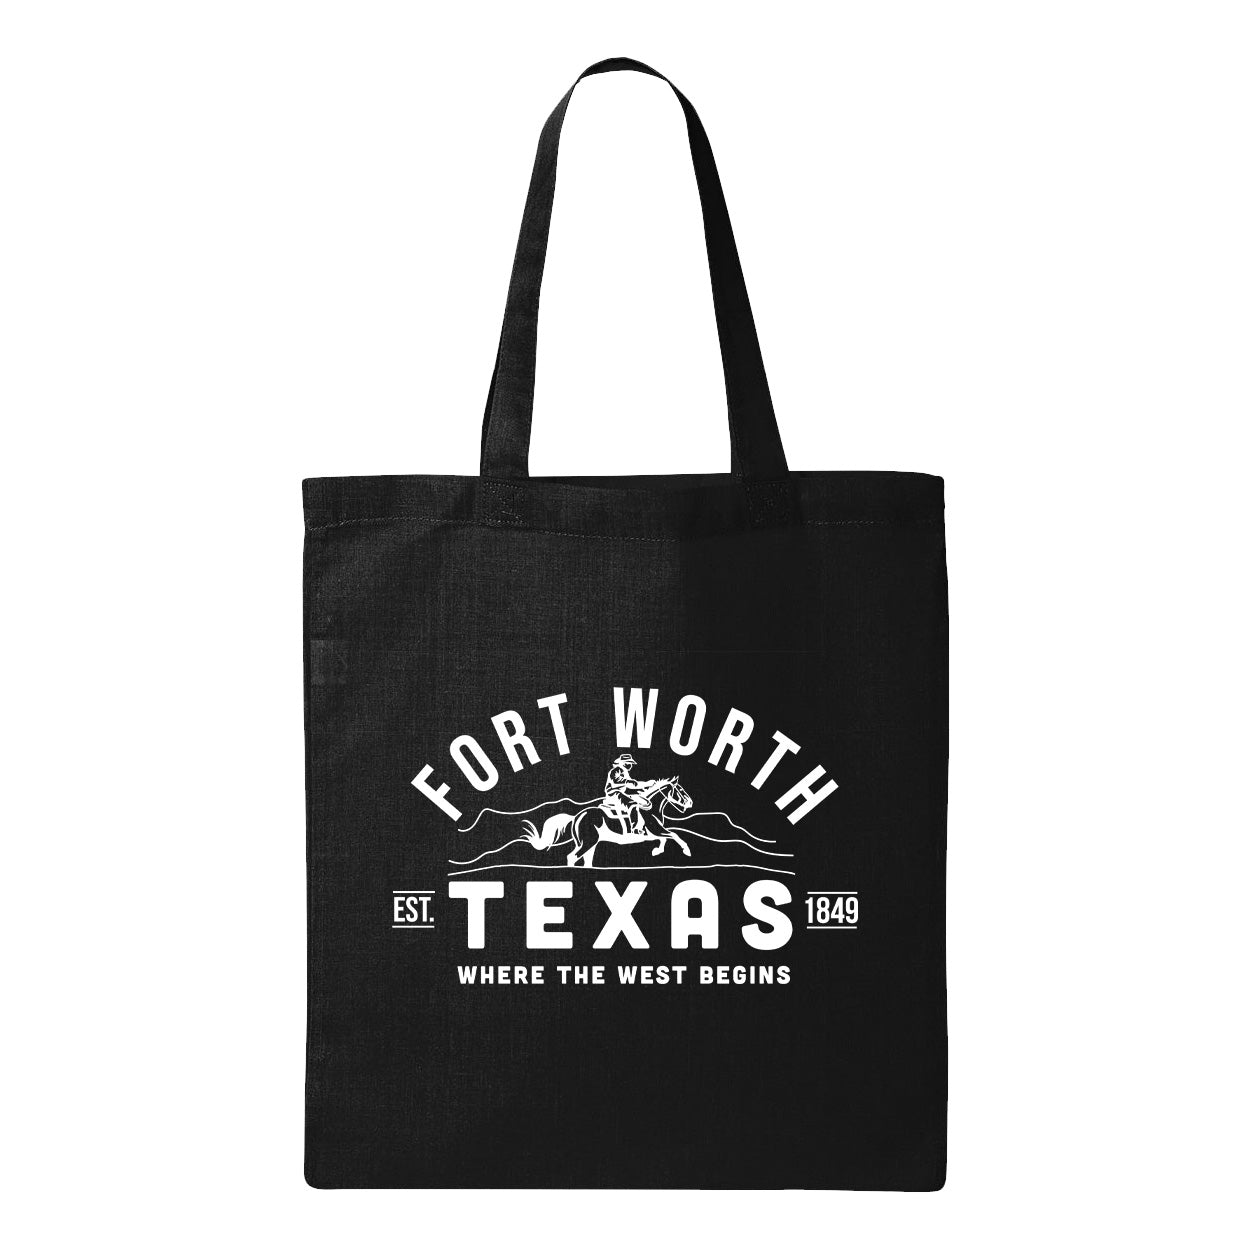 Fort Worth Texas Tote Bag